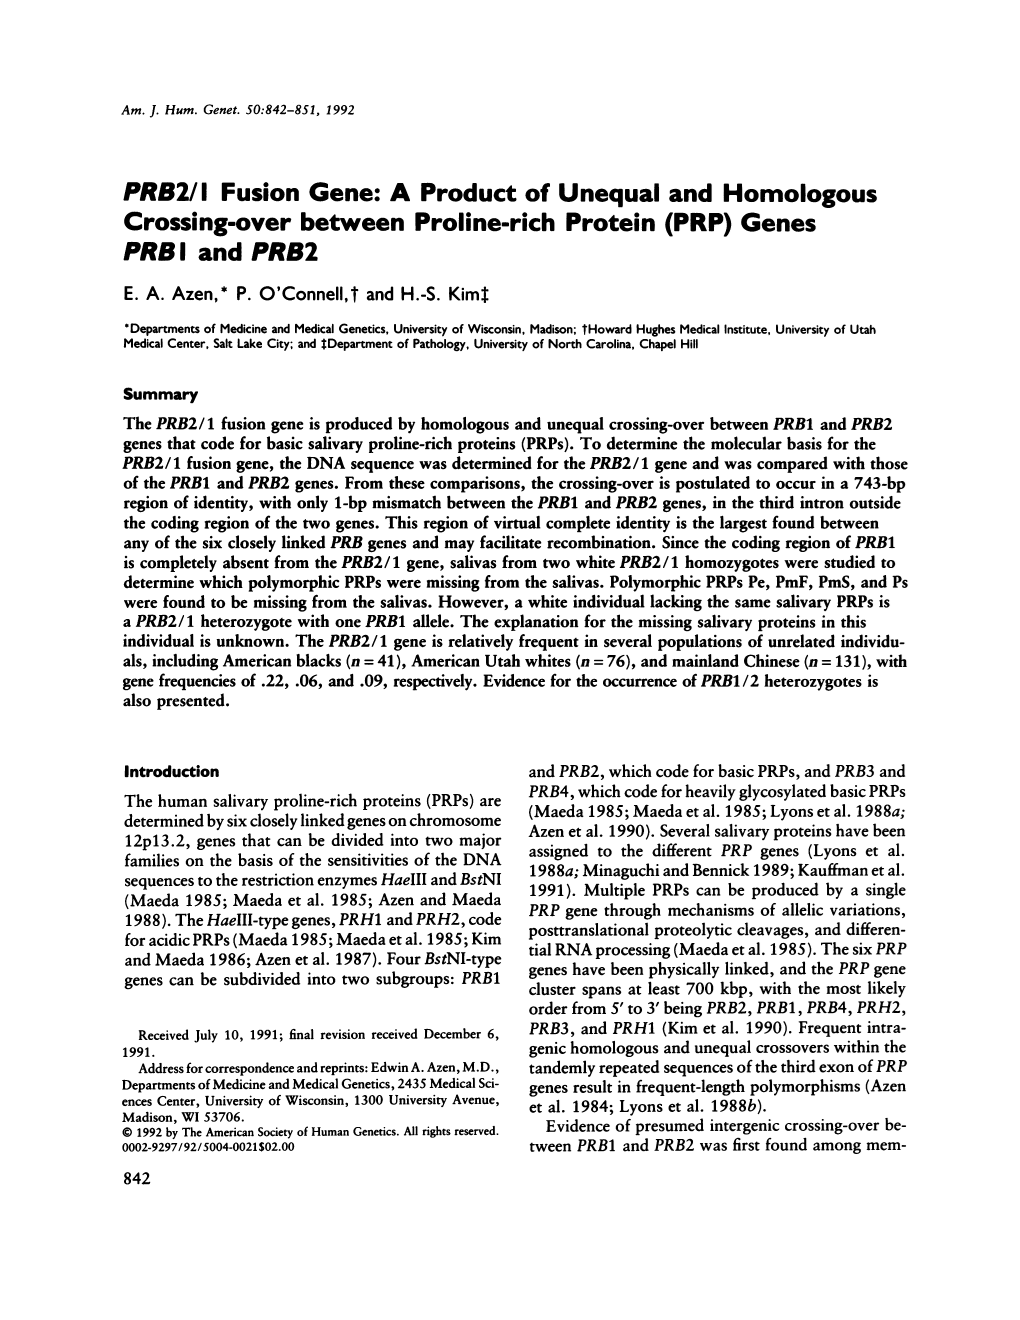 PRB2/1 Fusion Gene: a Product of Unequal and Homologous Crossing-Over Between Proline-Rich Protein (PRP) Genes PRB I and PRB2 E